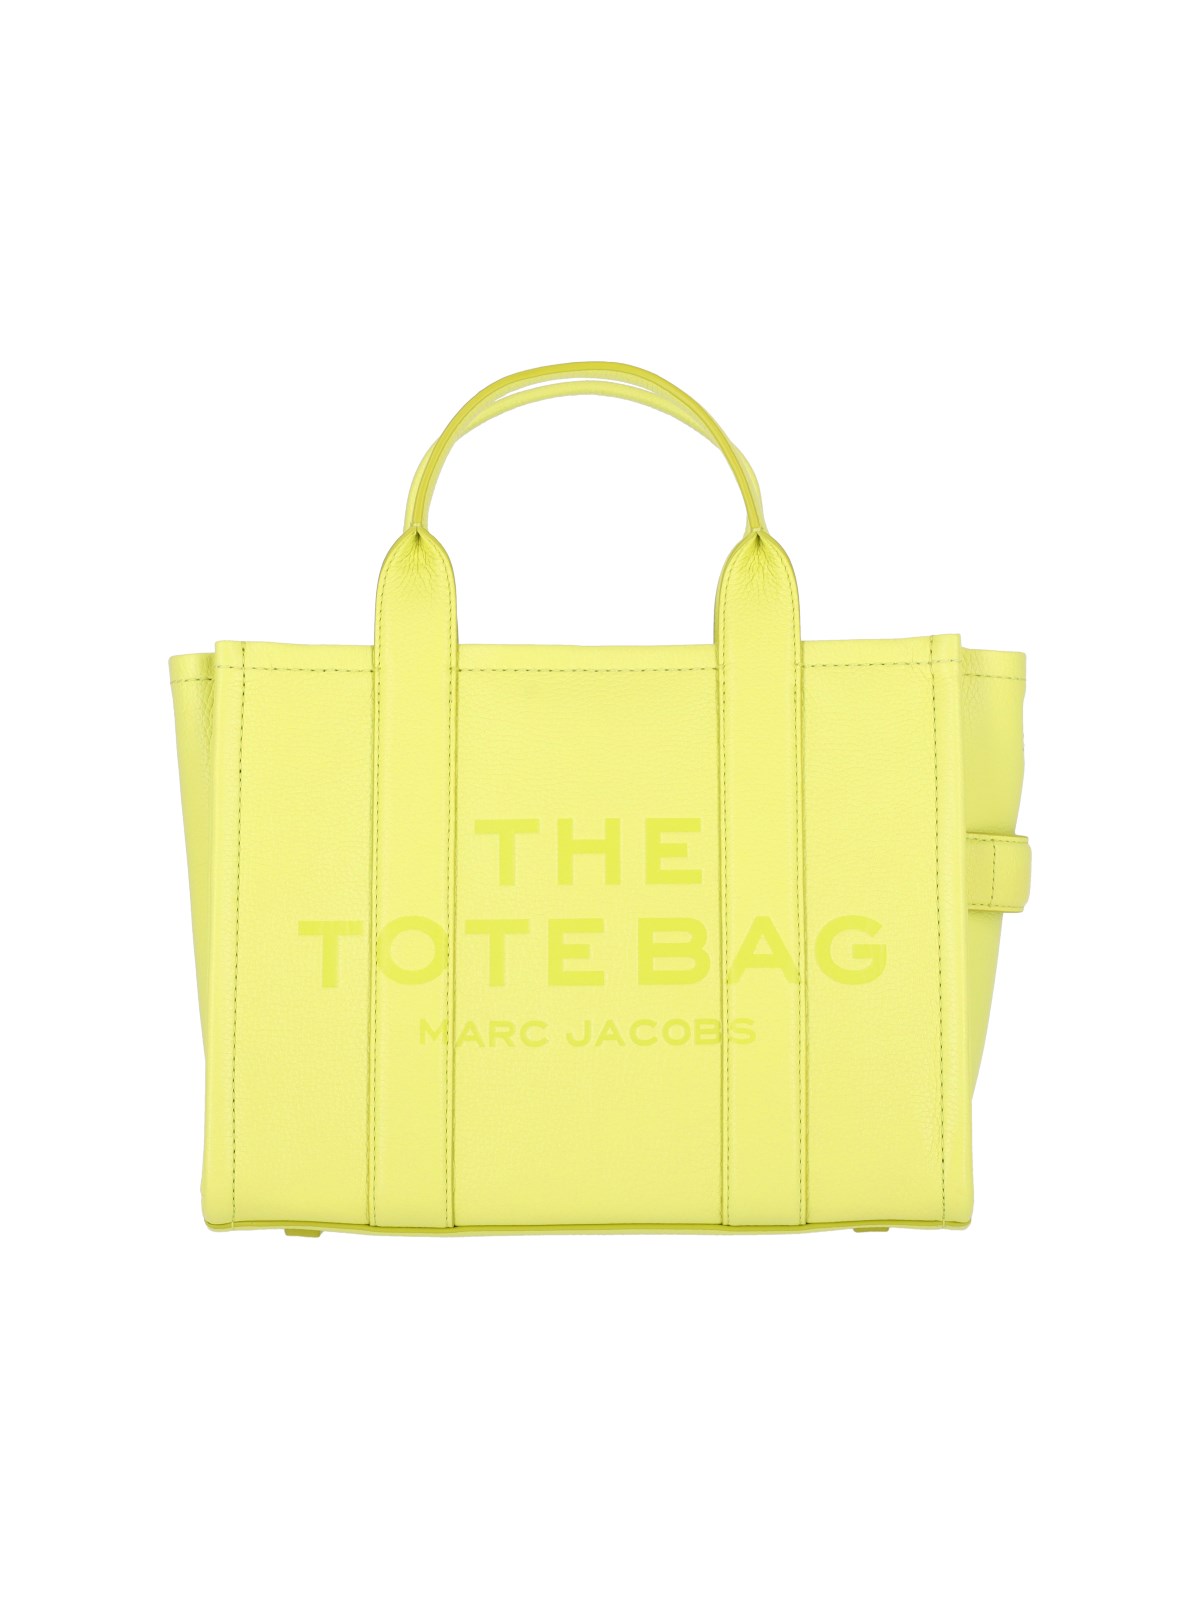 Marc Jacobs "the Medium Tote" Bag In Yellow